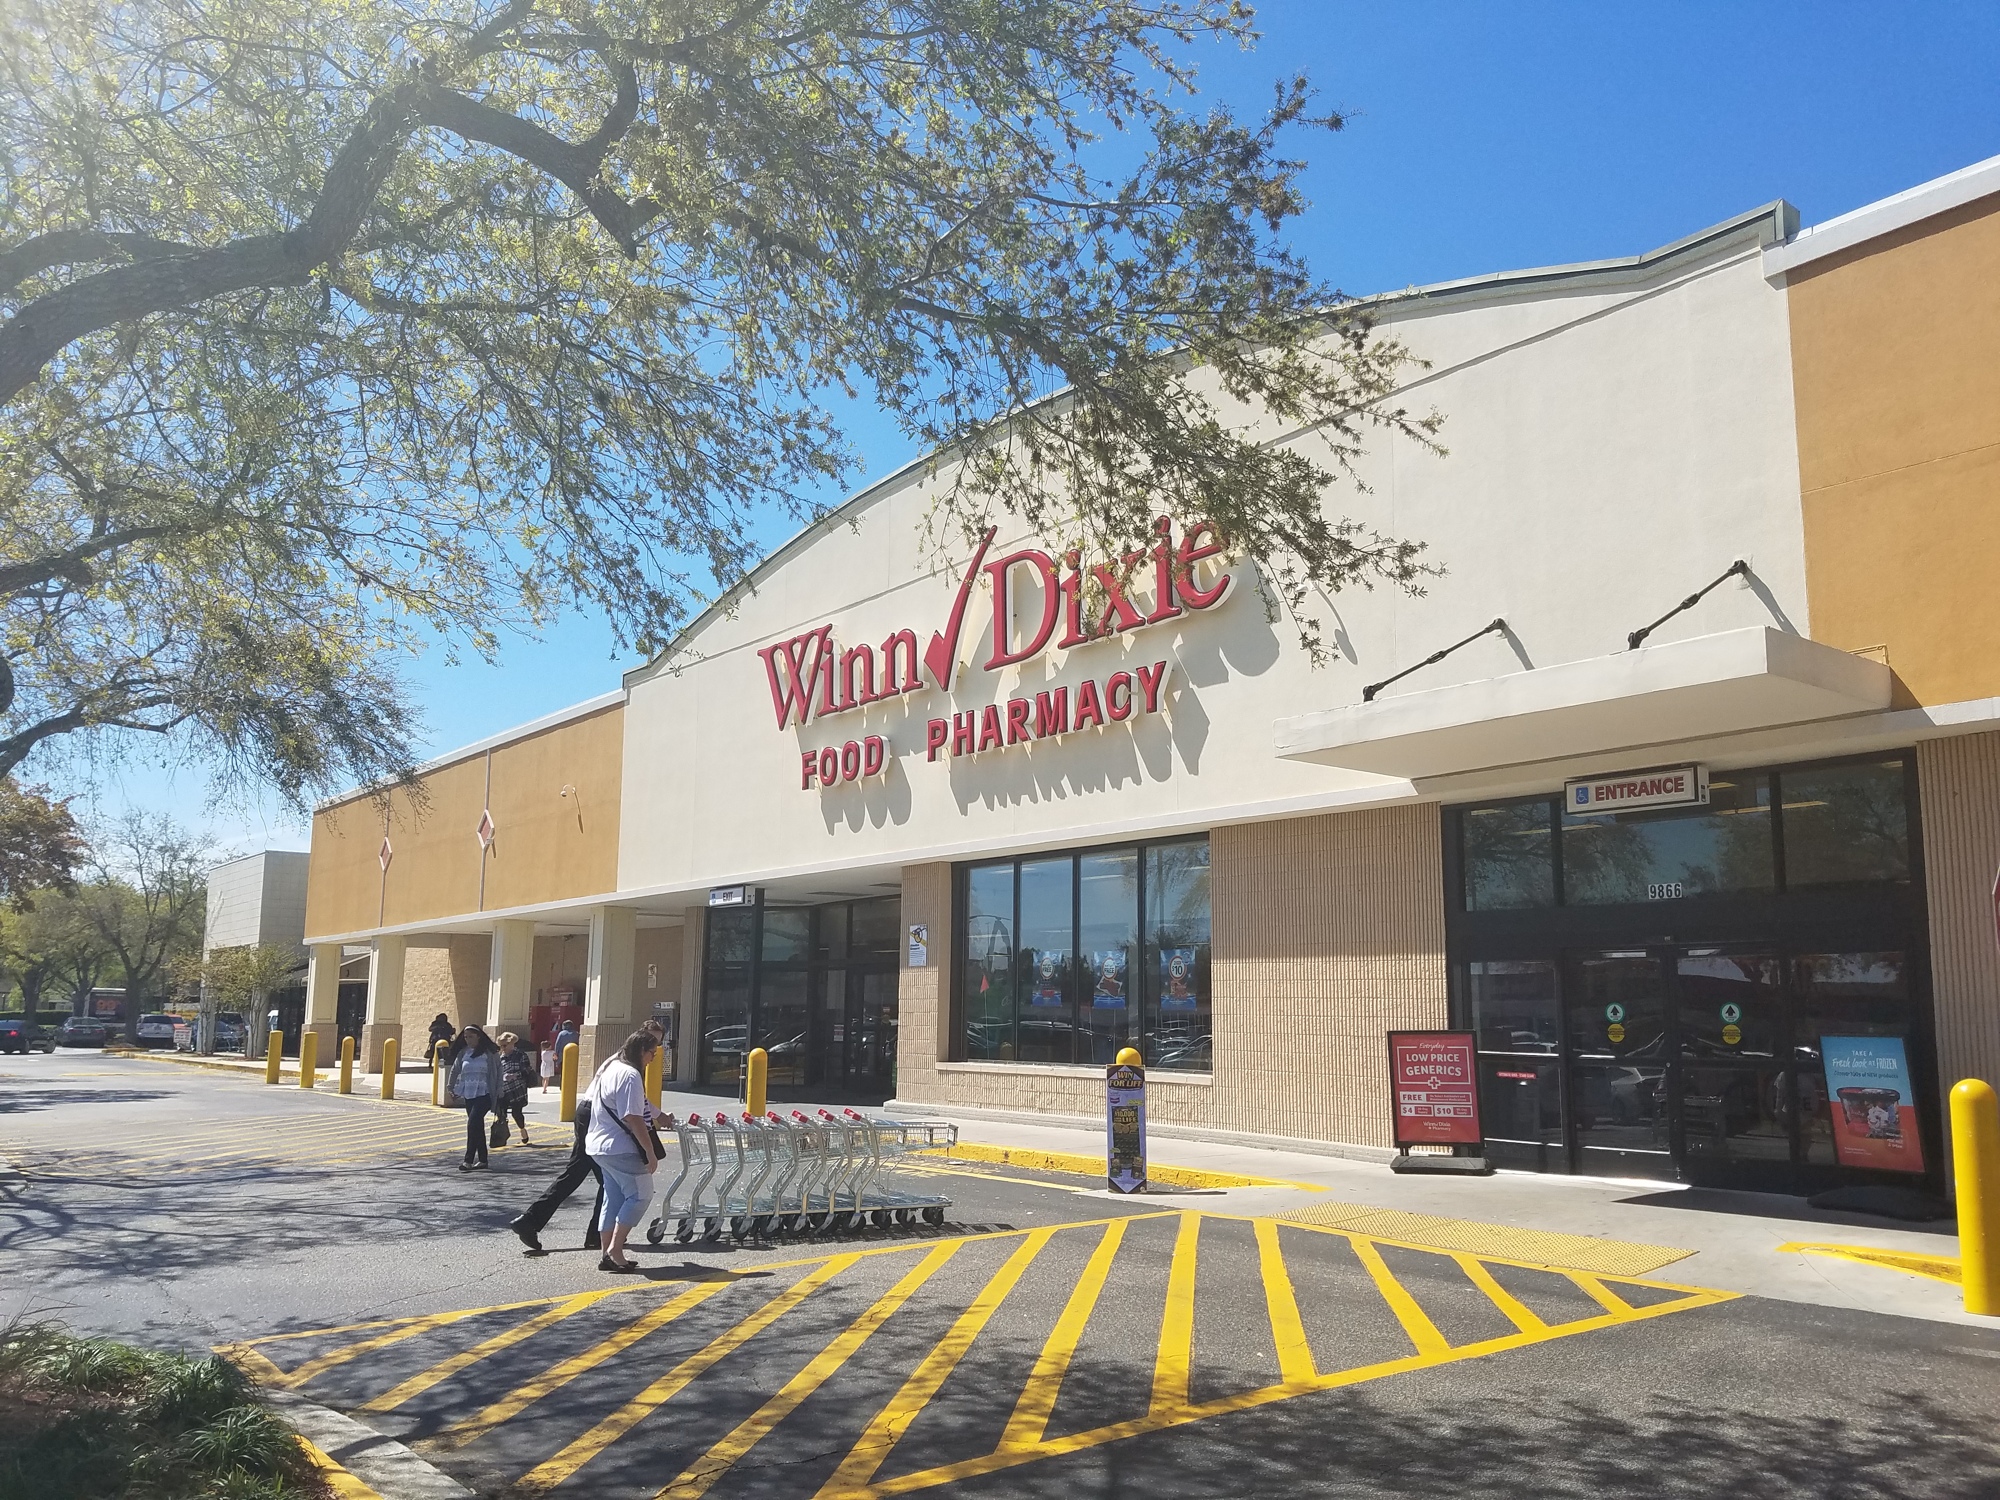 Southeastern Grocers will close the the Winn-Dixie at 9866 Baymeadows Road, a vacancy one real estate broker says the landlord won’t have trouble filling.